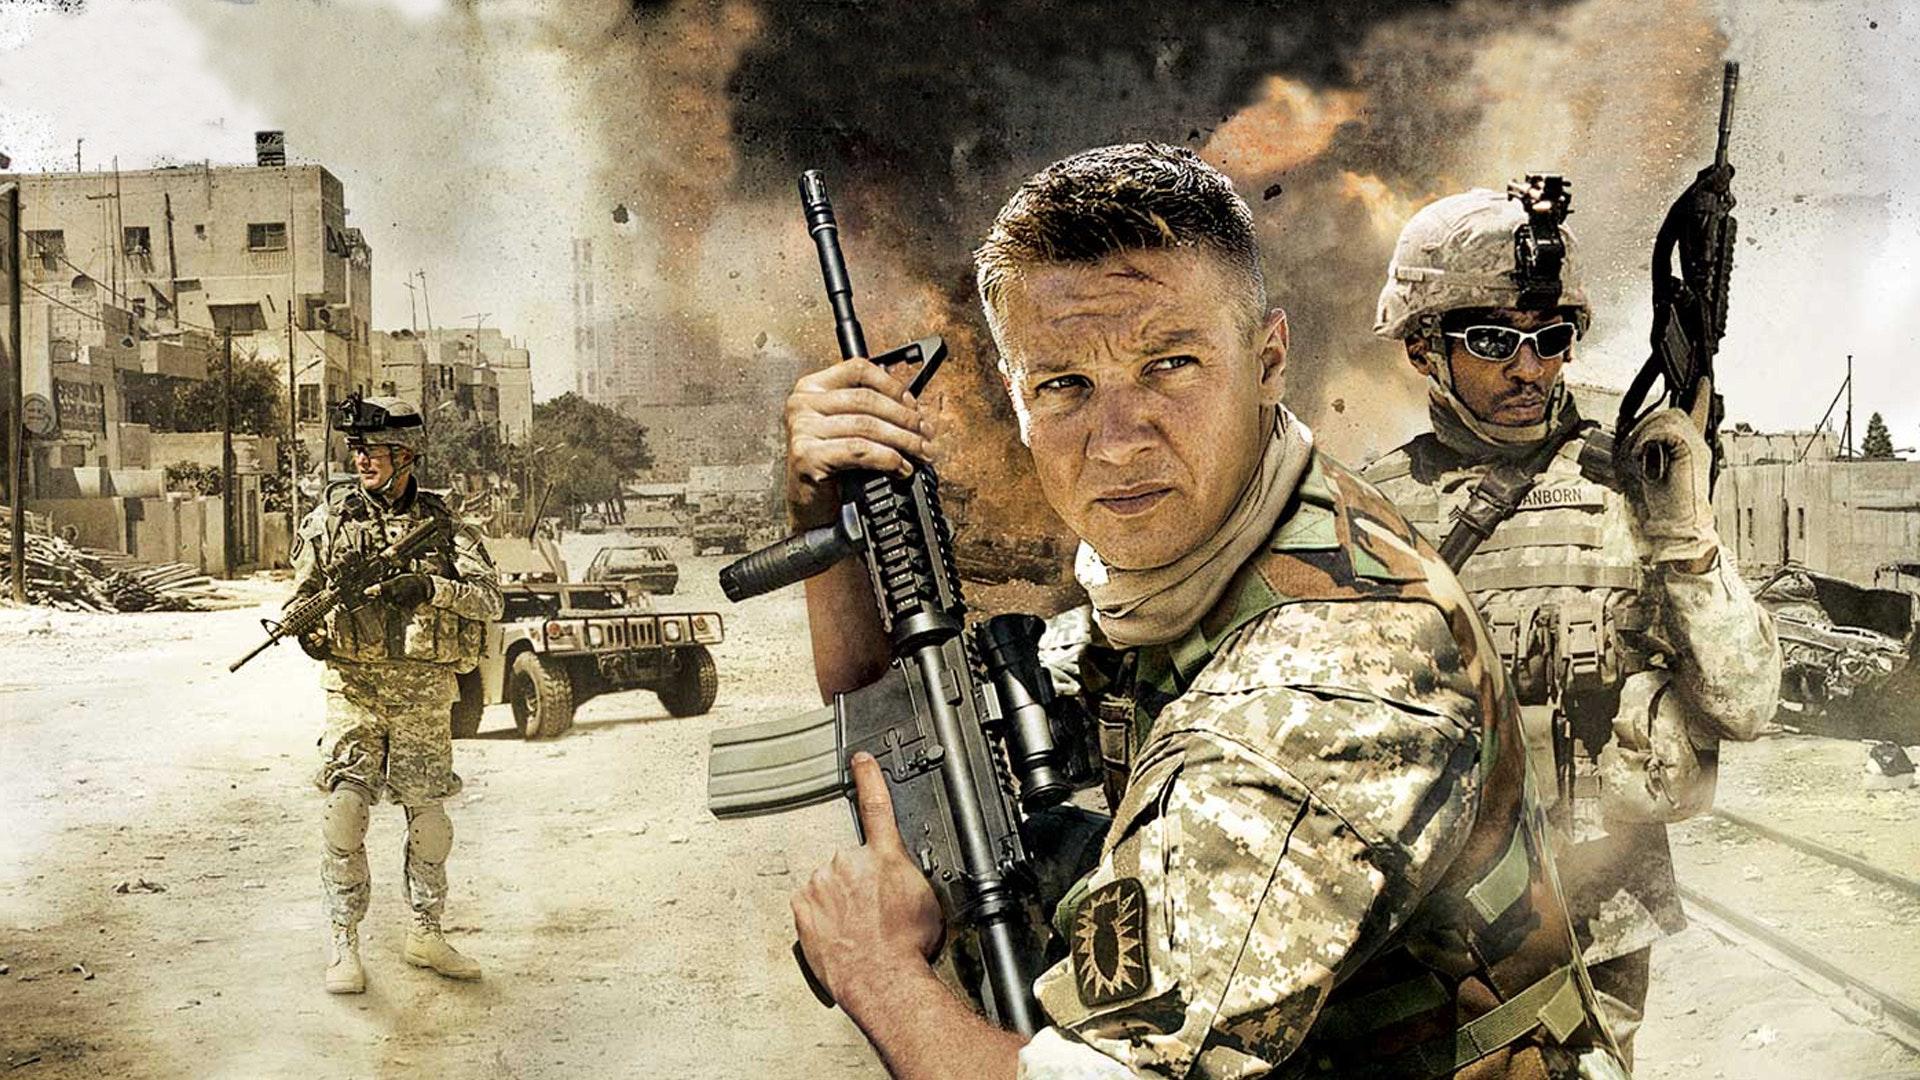 Watch The Hurt Locker Online with Lightbox from $4.99